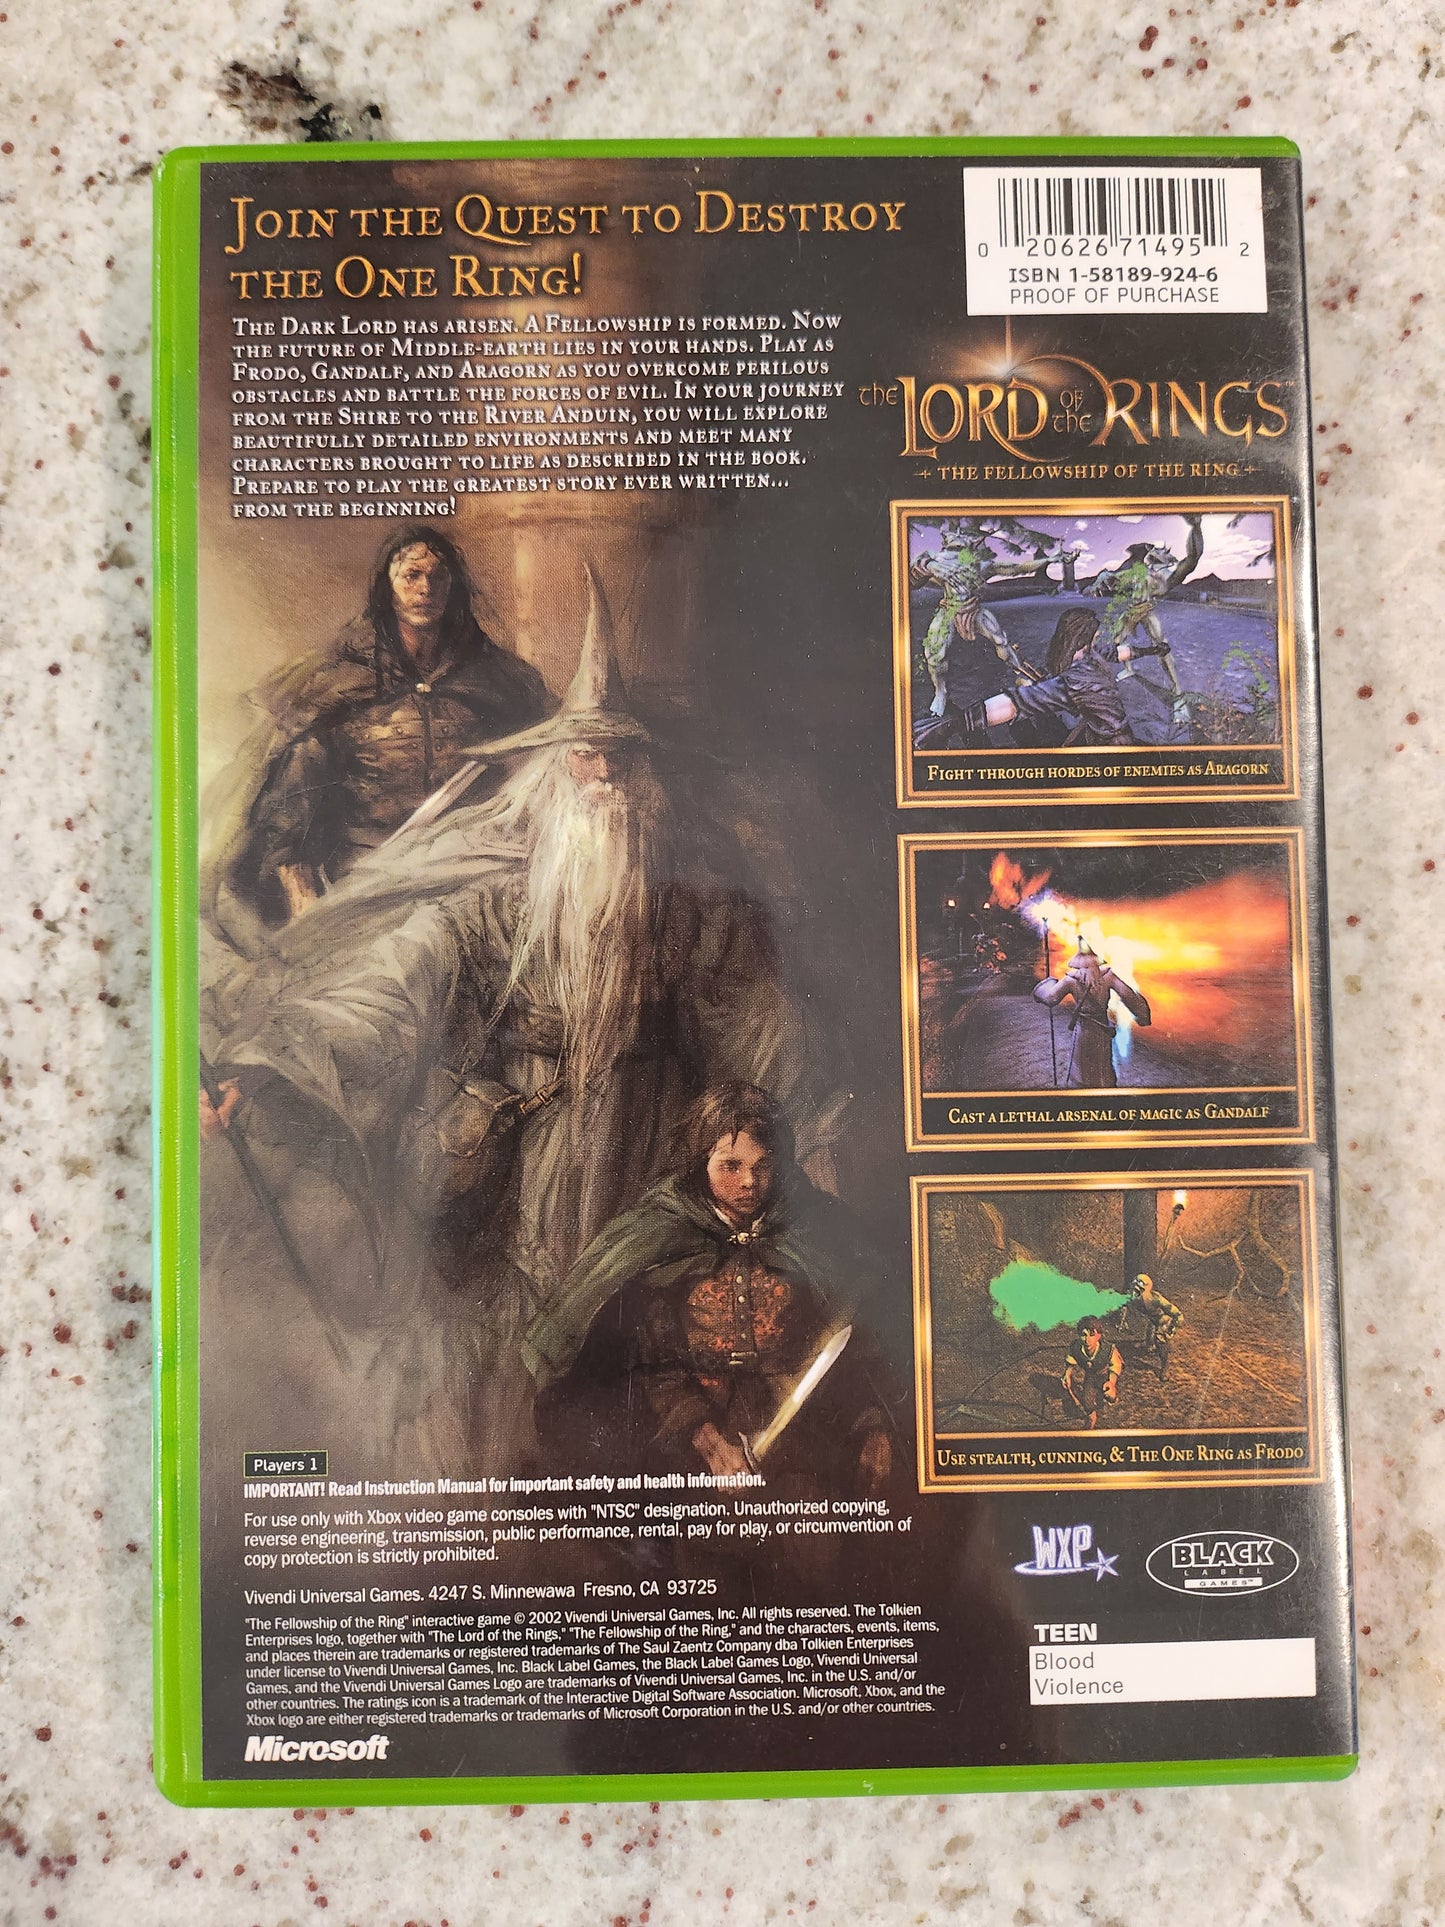 Lord of the Rings The Fellowship of the ring Xbox Original